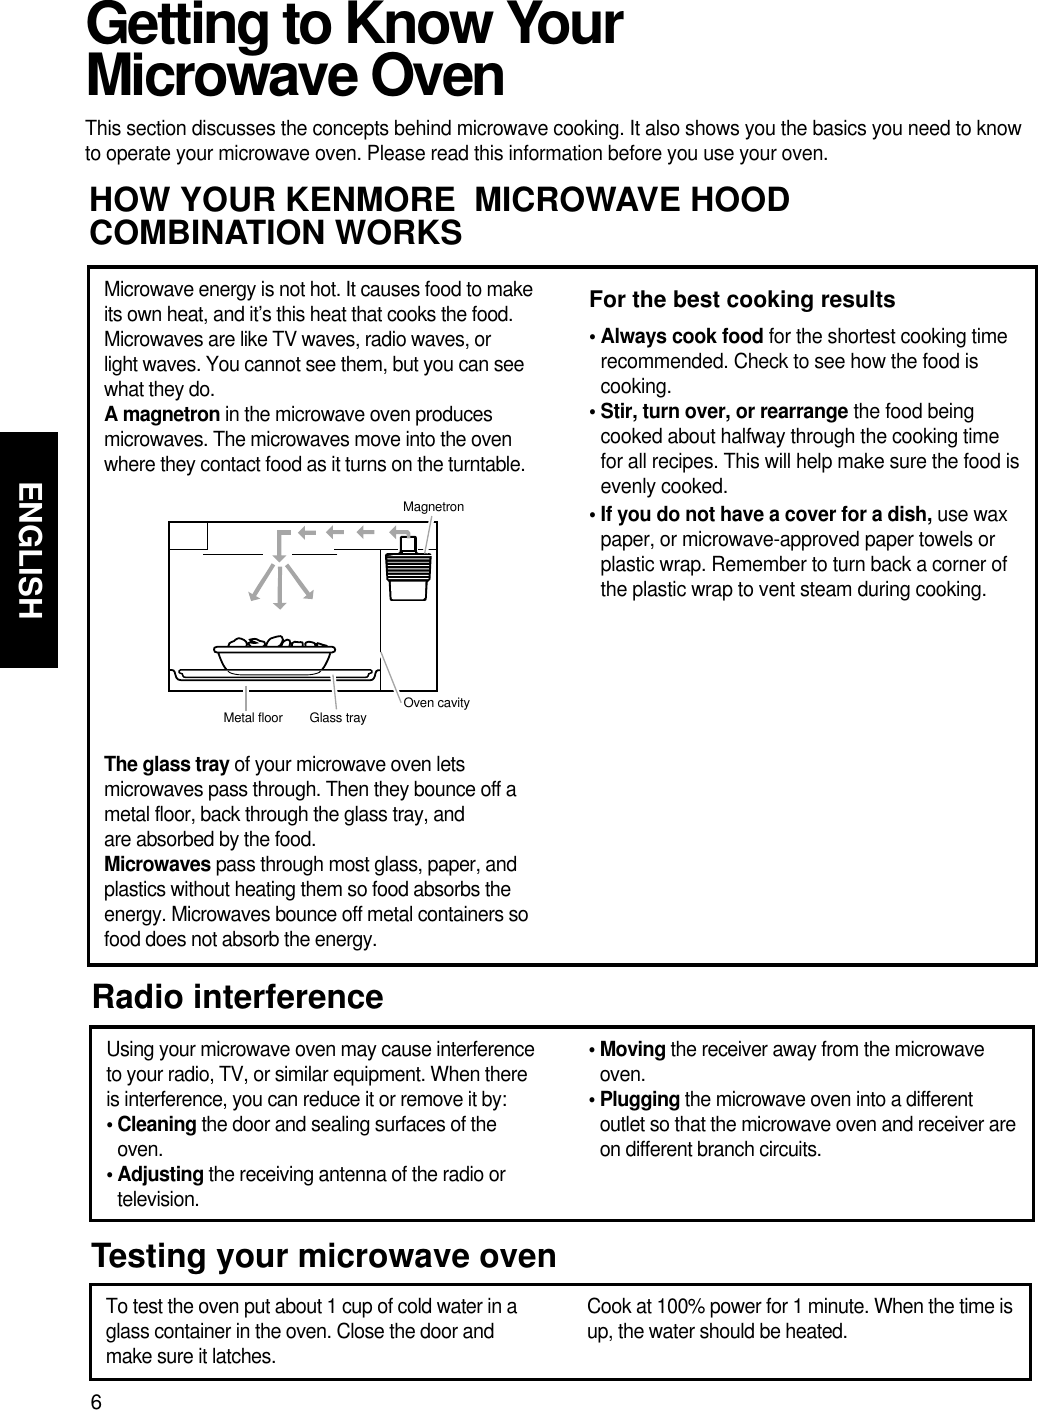 6ENGLISHGetting to Know YourMicrowave OvenThis section discusses the concepts behind microwave cooking. It also shows you the basics you need to knowto operate your microwave oven. Please read this information before you use your oven.HOW YOUR KENMORE  MICROWAVE HOODCOMBINATION WORKSRadio interferenceUsing your microwave oven may cause interferenceto your radio, TV, or similar equipment. When thereis interference, you can reduce it or remove it by:• Cleaning the door and sealing surfaces of theoven.• Adjusting the receiving antenna of the radio ortelevision.• Moving the receiver away from the microwaveoven.• Plugging the microwave oven into a differentoutlet so that the microwave oven and receiver areon different branch circuits.Microwave energy is not hot. It causes food to makeits own heat, and it’s this heat that cooks the food.Microwaves are like TV waves, radio waves, orlight waves. You cannot see them, but you can seewhat they do.A magnetron in the microwave oven producesmicrowaves. The microwaves move into the ovenwhere they contact food as it turns on the turntable.The glass tray of your microwave oven letsmicrowaves pass through. Then they bounce off ametal floor, back through the glass tray, andare absorbed by the food.Microwaves pass through most glass, paper, andplastics without heating them so food absorbs theenergy. Microwaves bounce off metal containers sofood does not absorb the energy.For the best cooking results• Always cook food for the shortest cooking timerecommended. Check to see how the food iscooking. • Stir, turn over, or rearrange the food beingcooked about halfway through the cooking timefor all recipes. This will help make sure the food isevenly cooked. • If you do not have a cover for a dish, use waxpaper, or microwave-approved paper towels orplastic wrap. Remember to turn back a corner ofthe plastic wrap to vent steam during cooking.MagnetronMetal floor Glass tray Oven cavityTesting your microwave ovenTo test the oven put about 1 cup of cold water in aglass container in the oven. Close the door andmake sure it latches.           Cook at 100% power for 1 minute. When the time isup, the water should be heated.